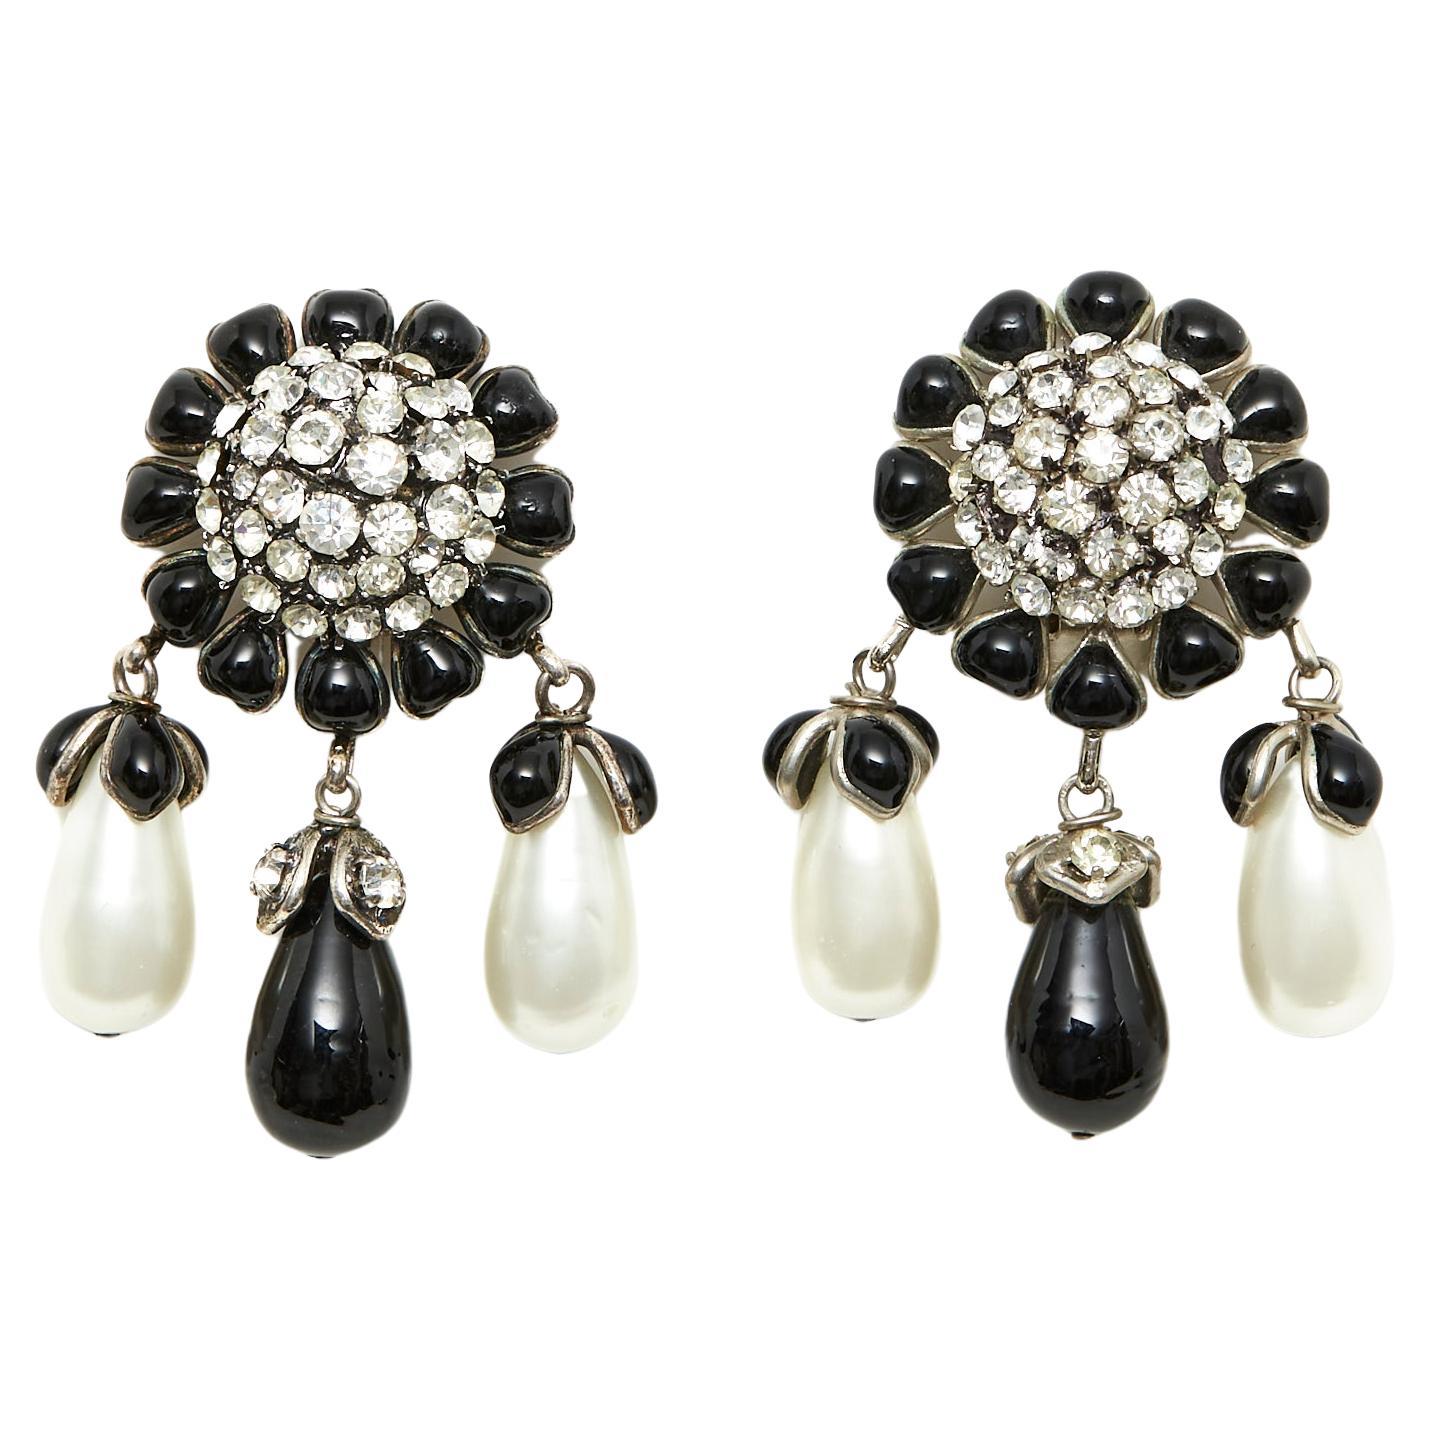 Gripoix Chanel Haute Couture glass pearls strass clips earrings   For Sale